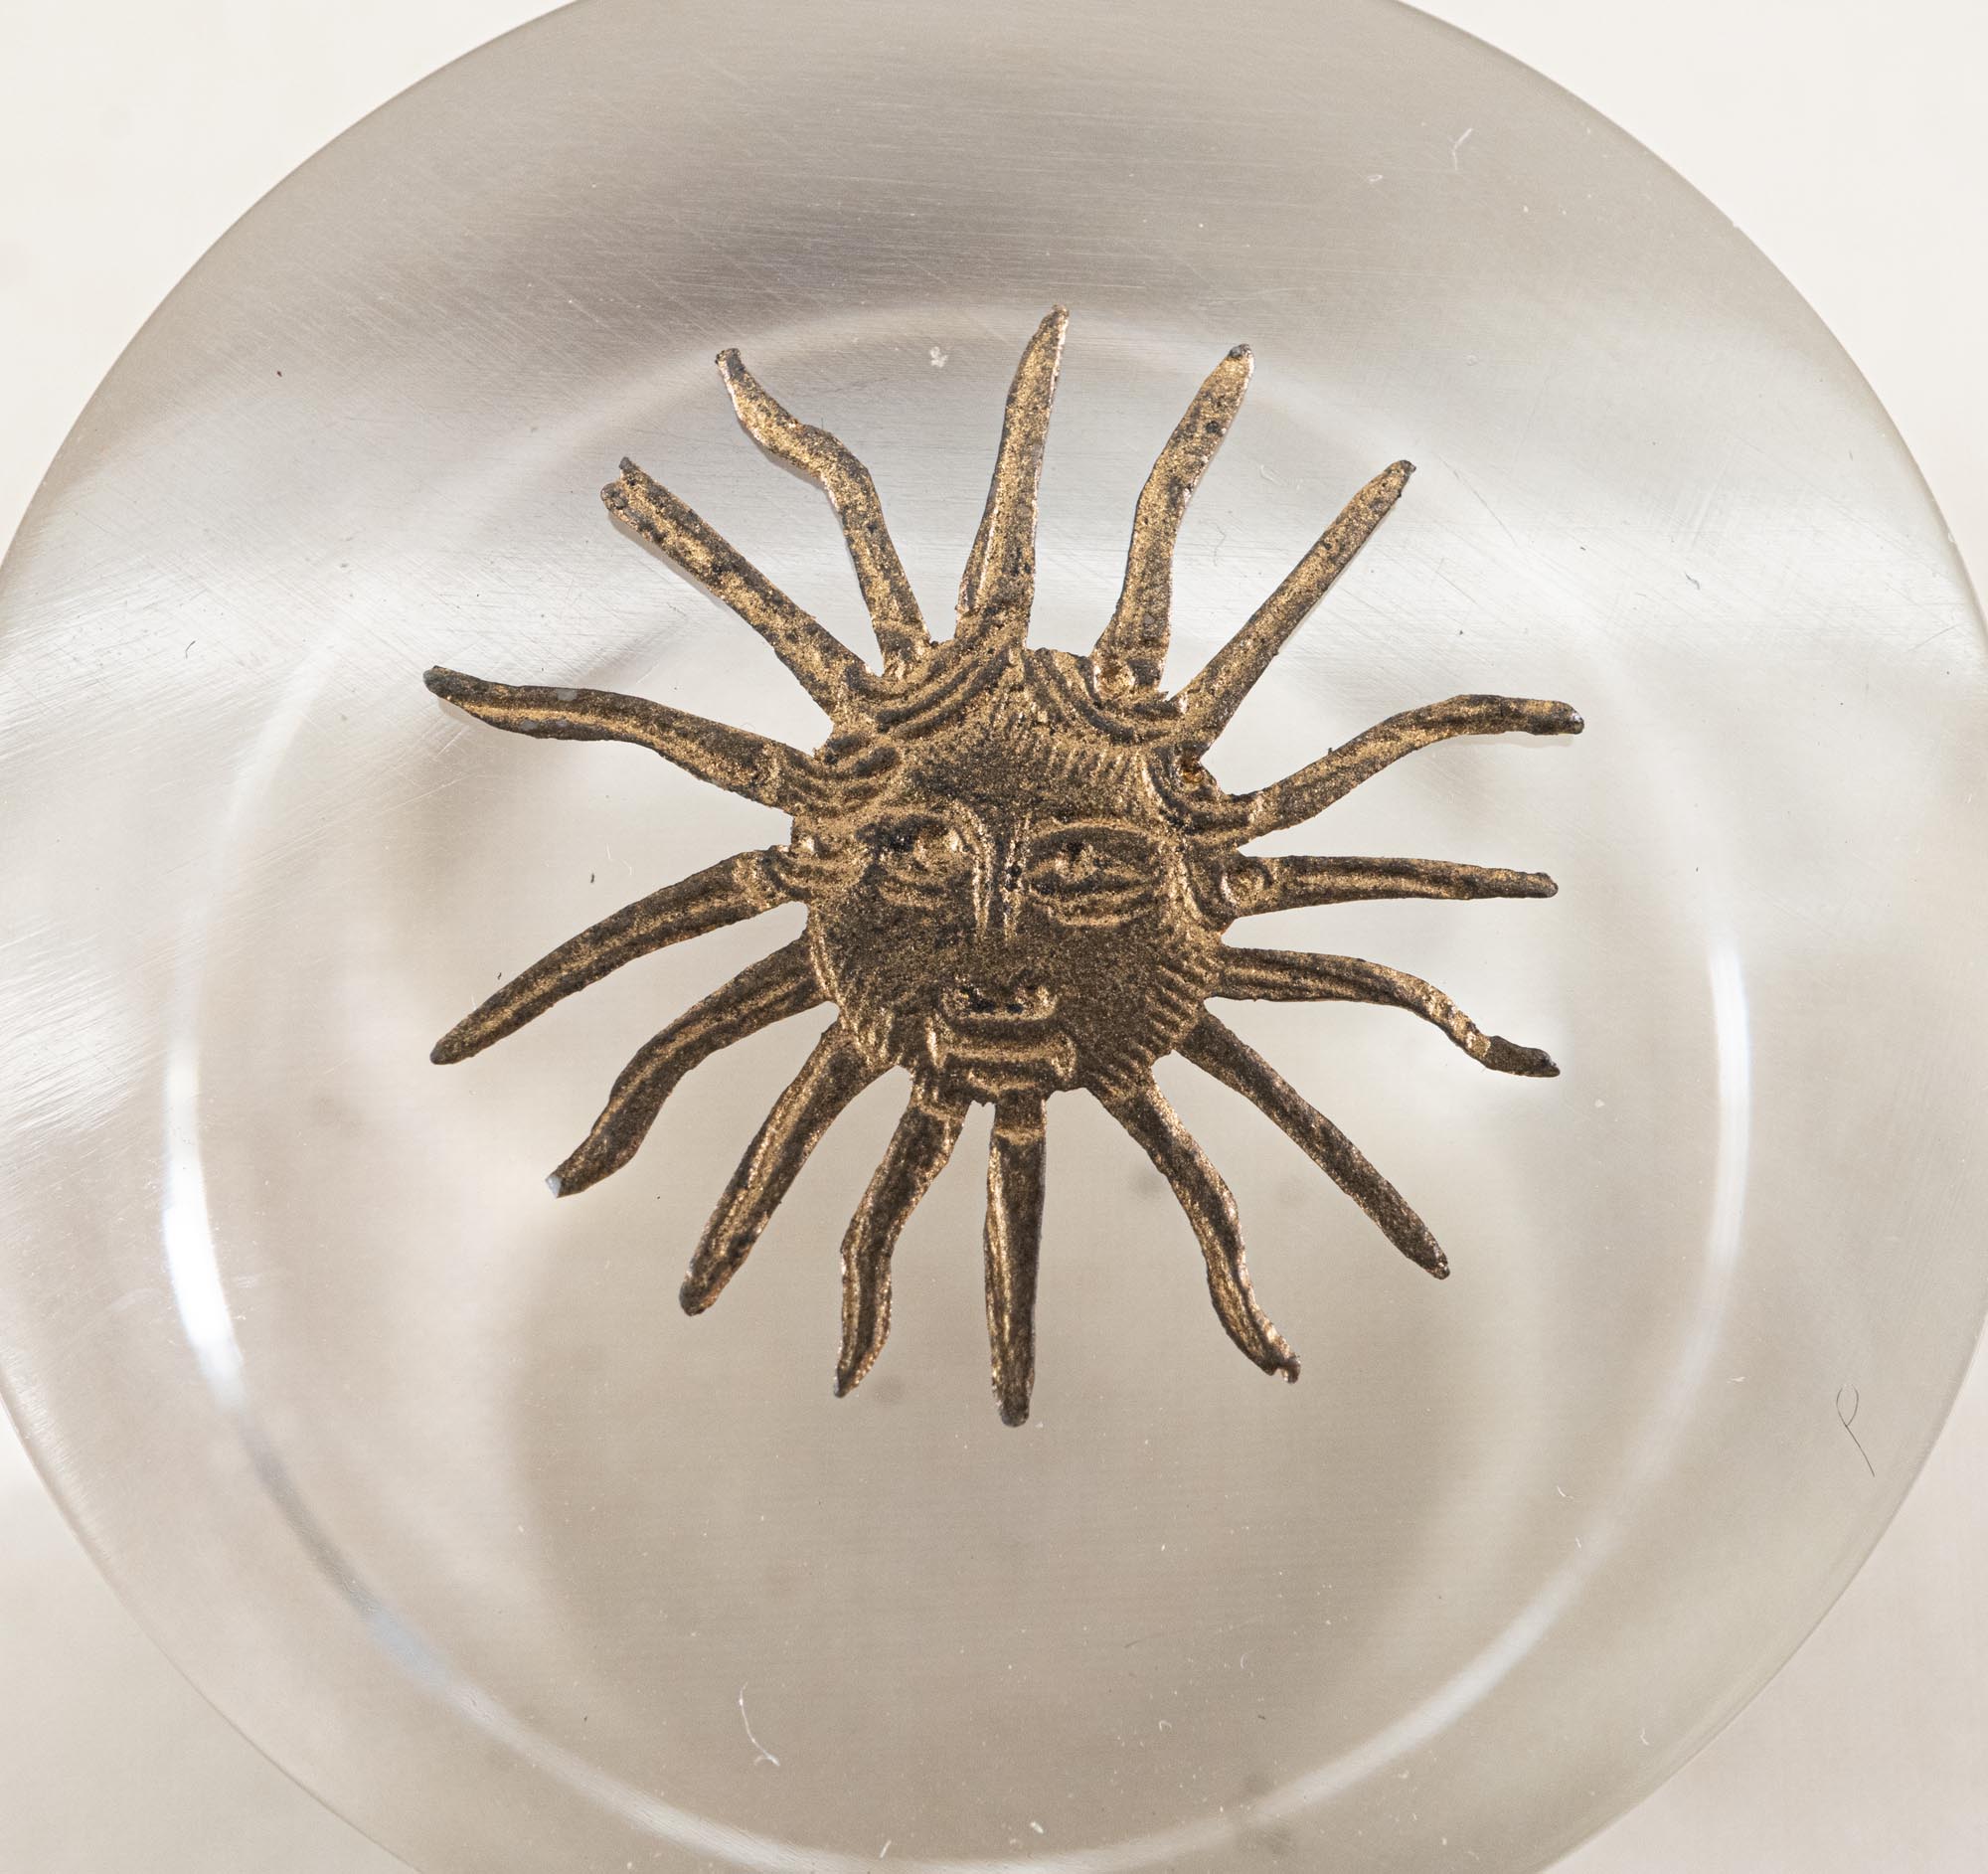 The Sun King symbol was part of the royal emblem of King Louis XIV. Museum of the Coastal Bend Victoria, TX